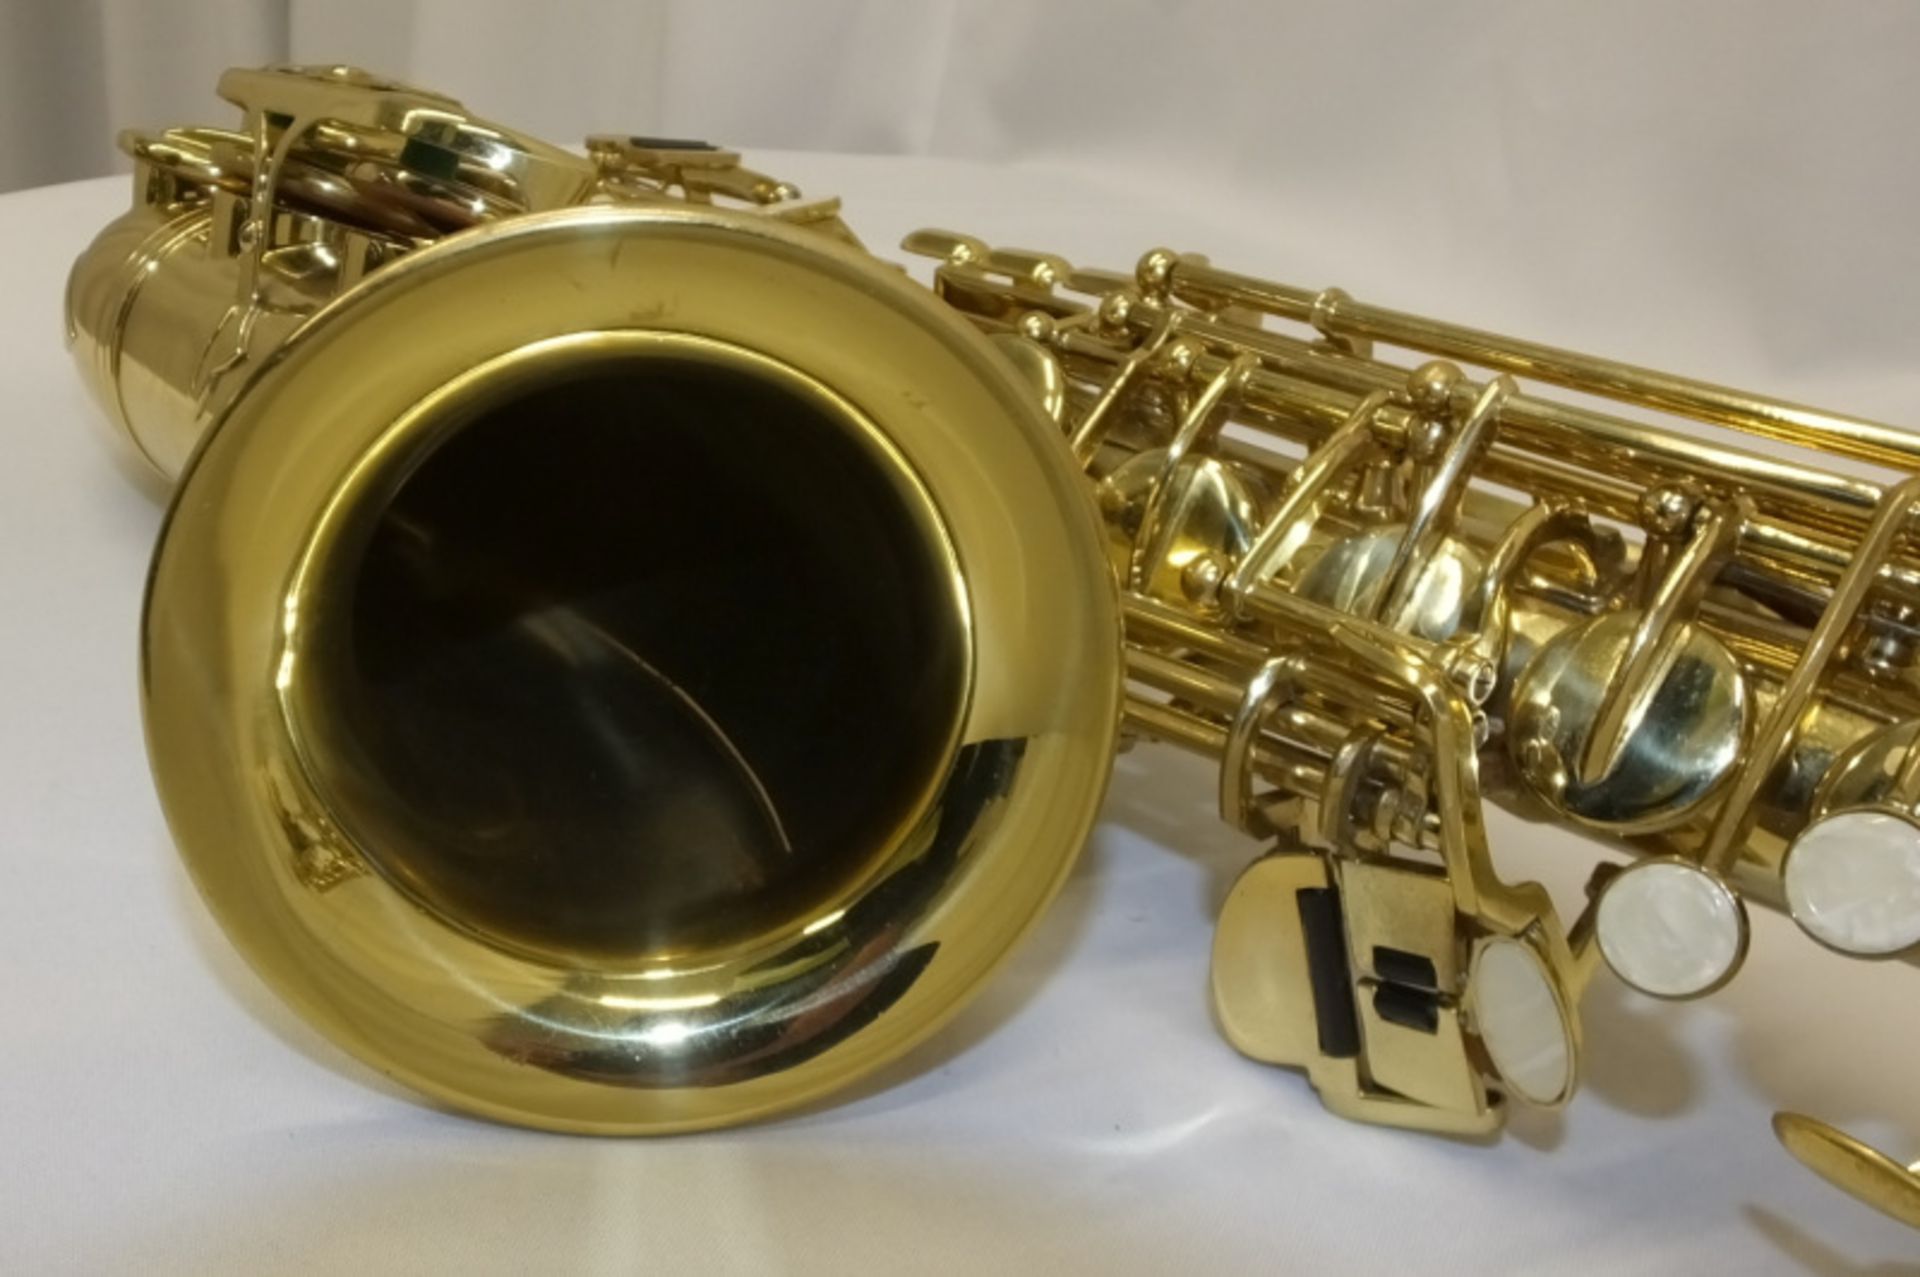 Simba Instruments Saxophone in Simba case - serial number 20960603 - Please check photos carefully - Image 9 of 16